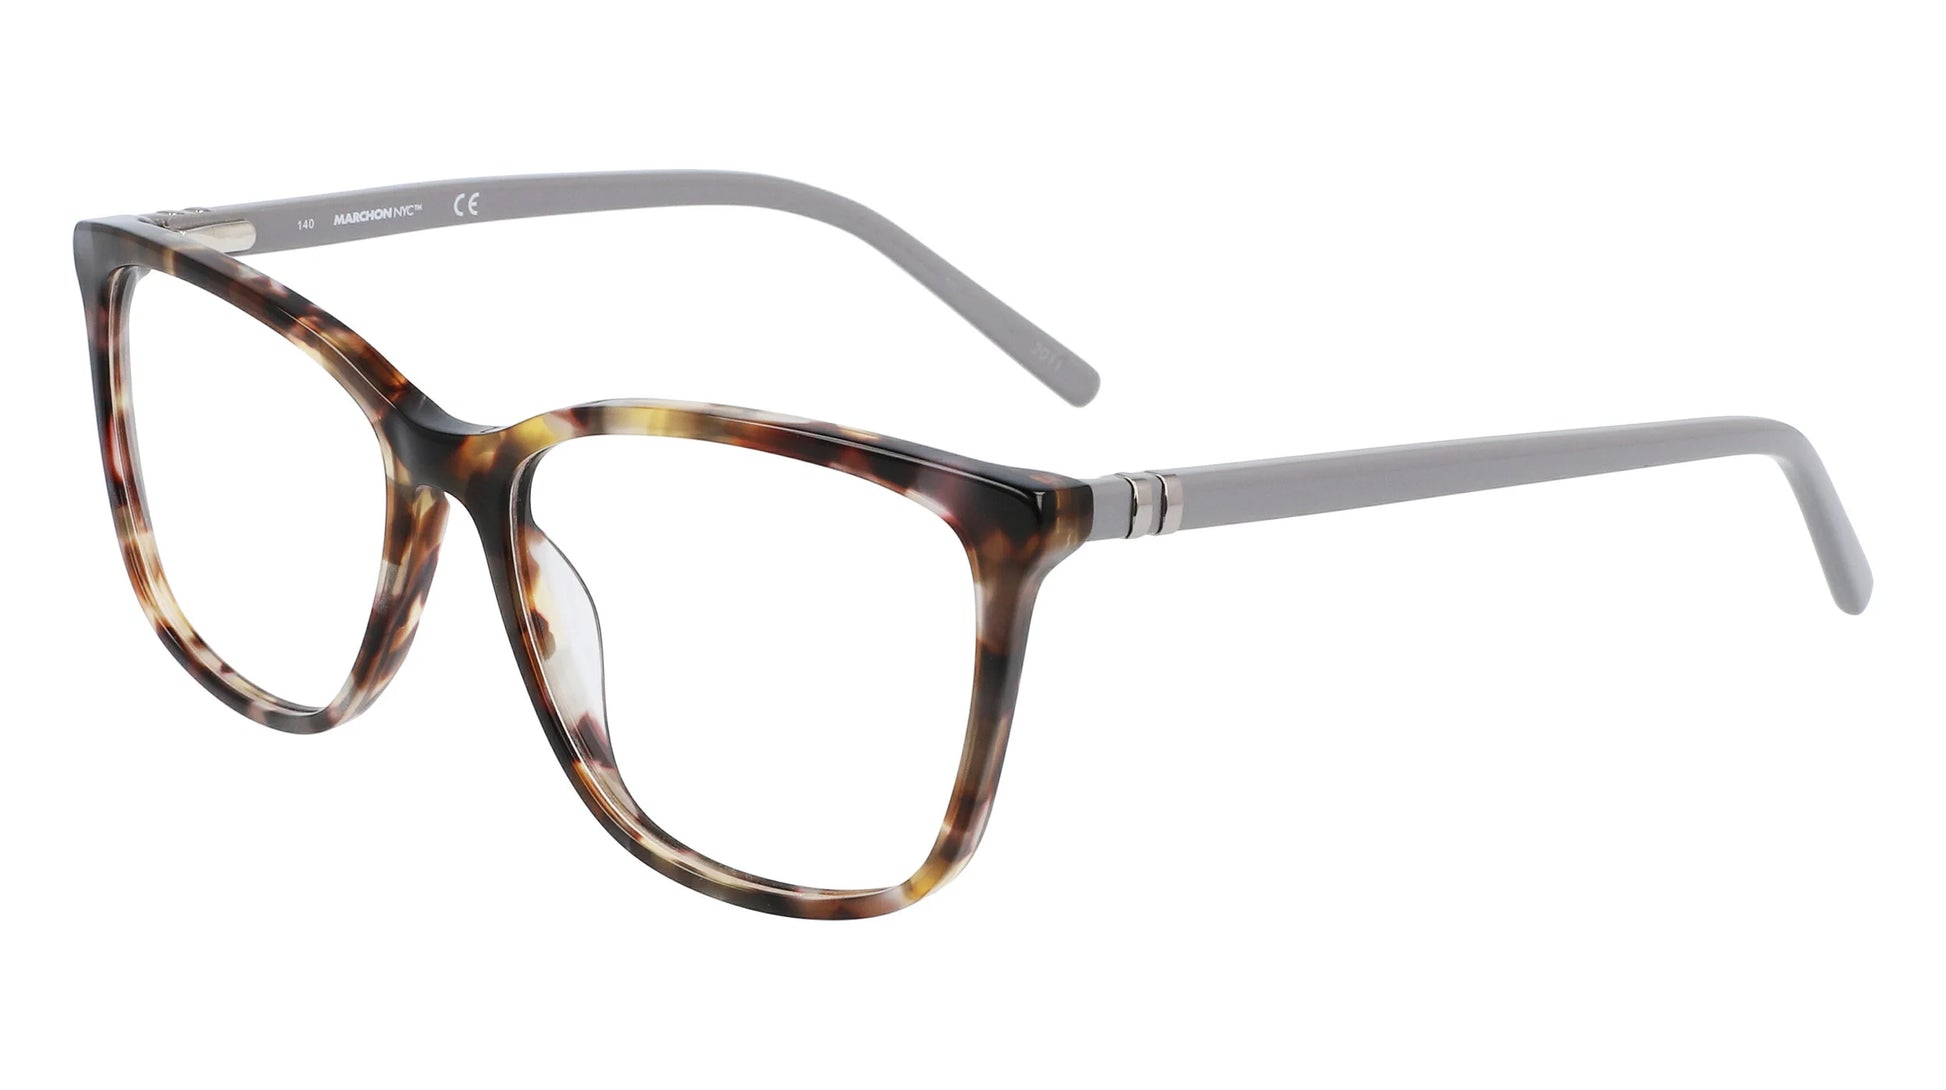 Marchon NYC M-5015 Eyeglasses Tortoise With Grey